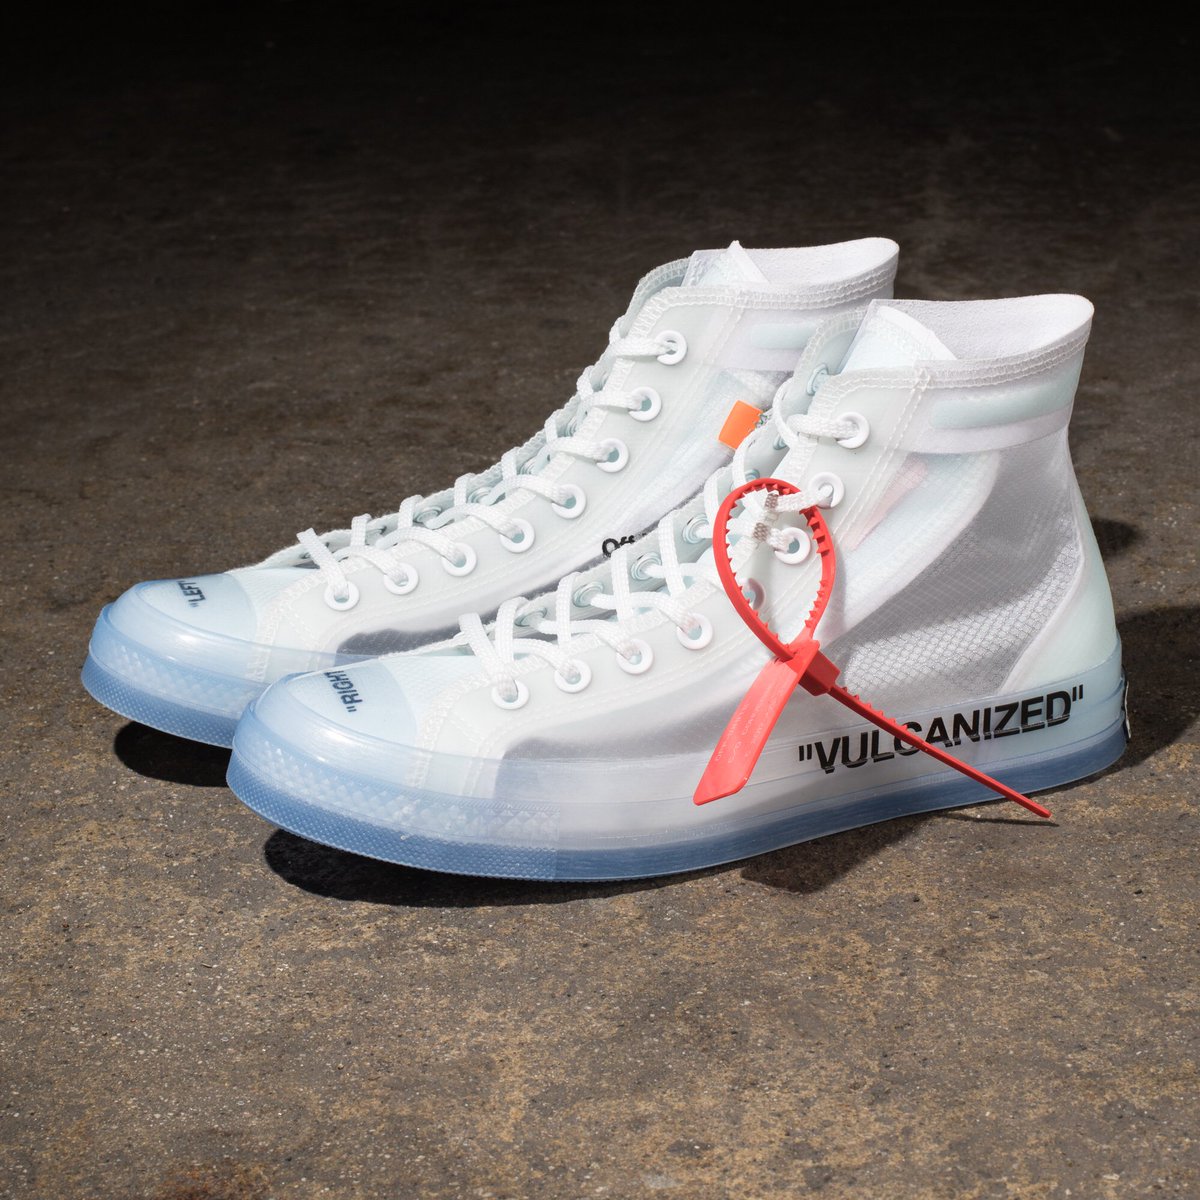 UNDEFEATED on Twitter: "See the Converse x Off White Ten” Chuck 70 Raffle on our Instagram now https://t.co/HzaFUPgrIZ https://t.co/l3RXezbO1P"